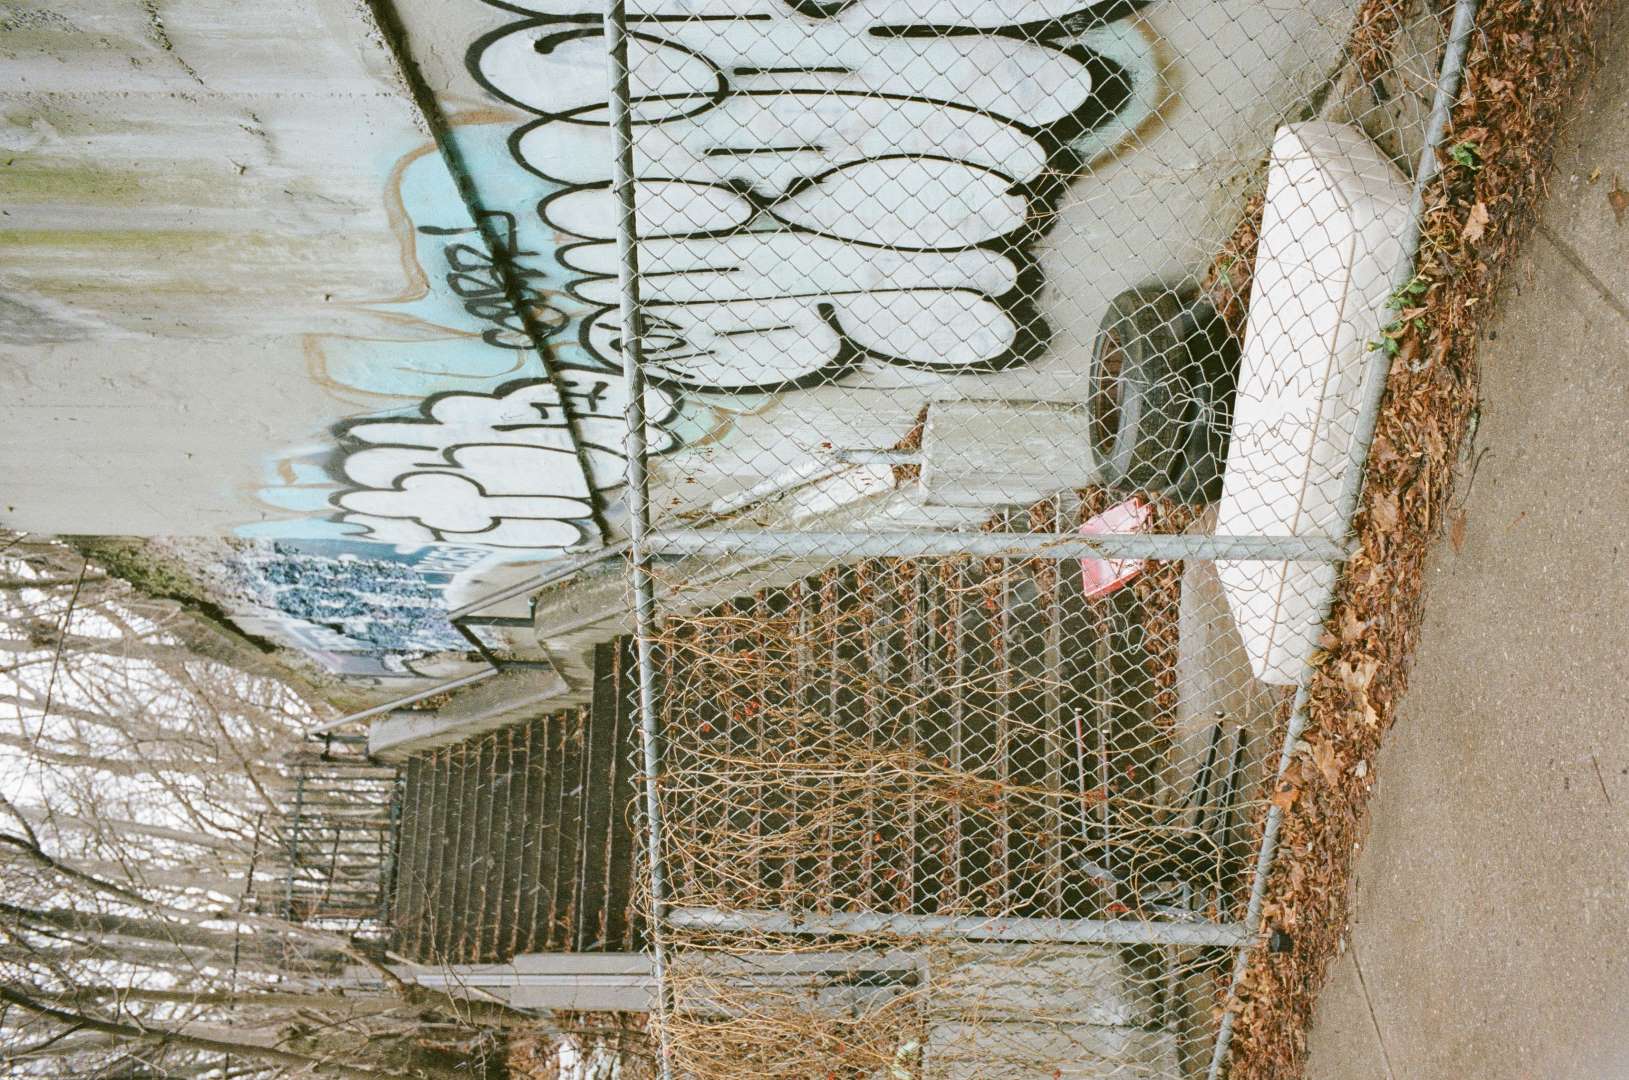 A colour photograph of an exterior stairwell, fenced off with a mattress and chair behind it